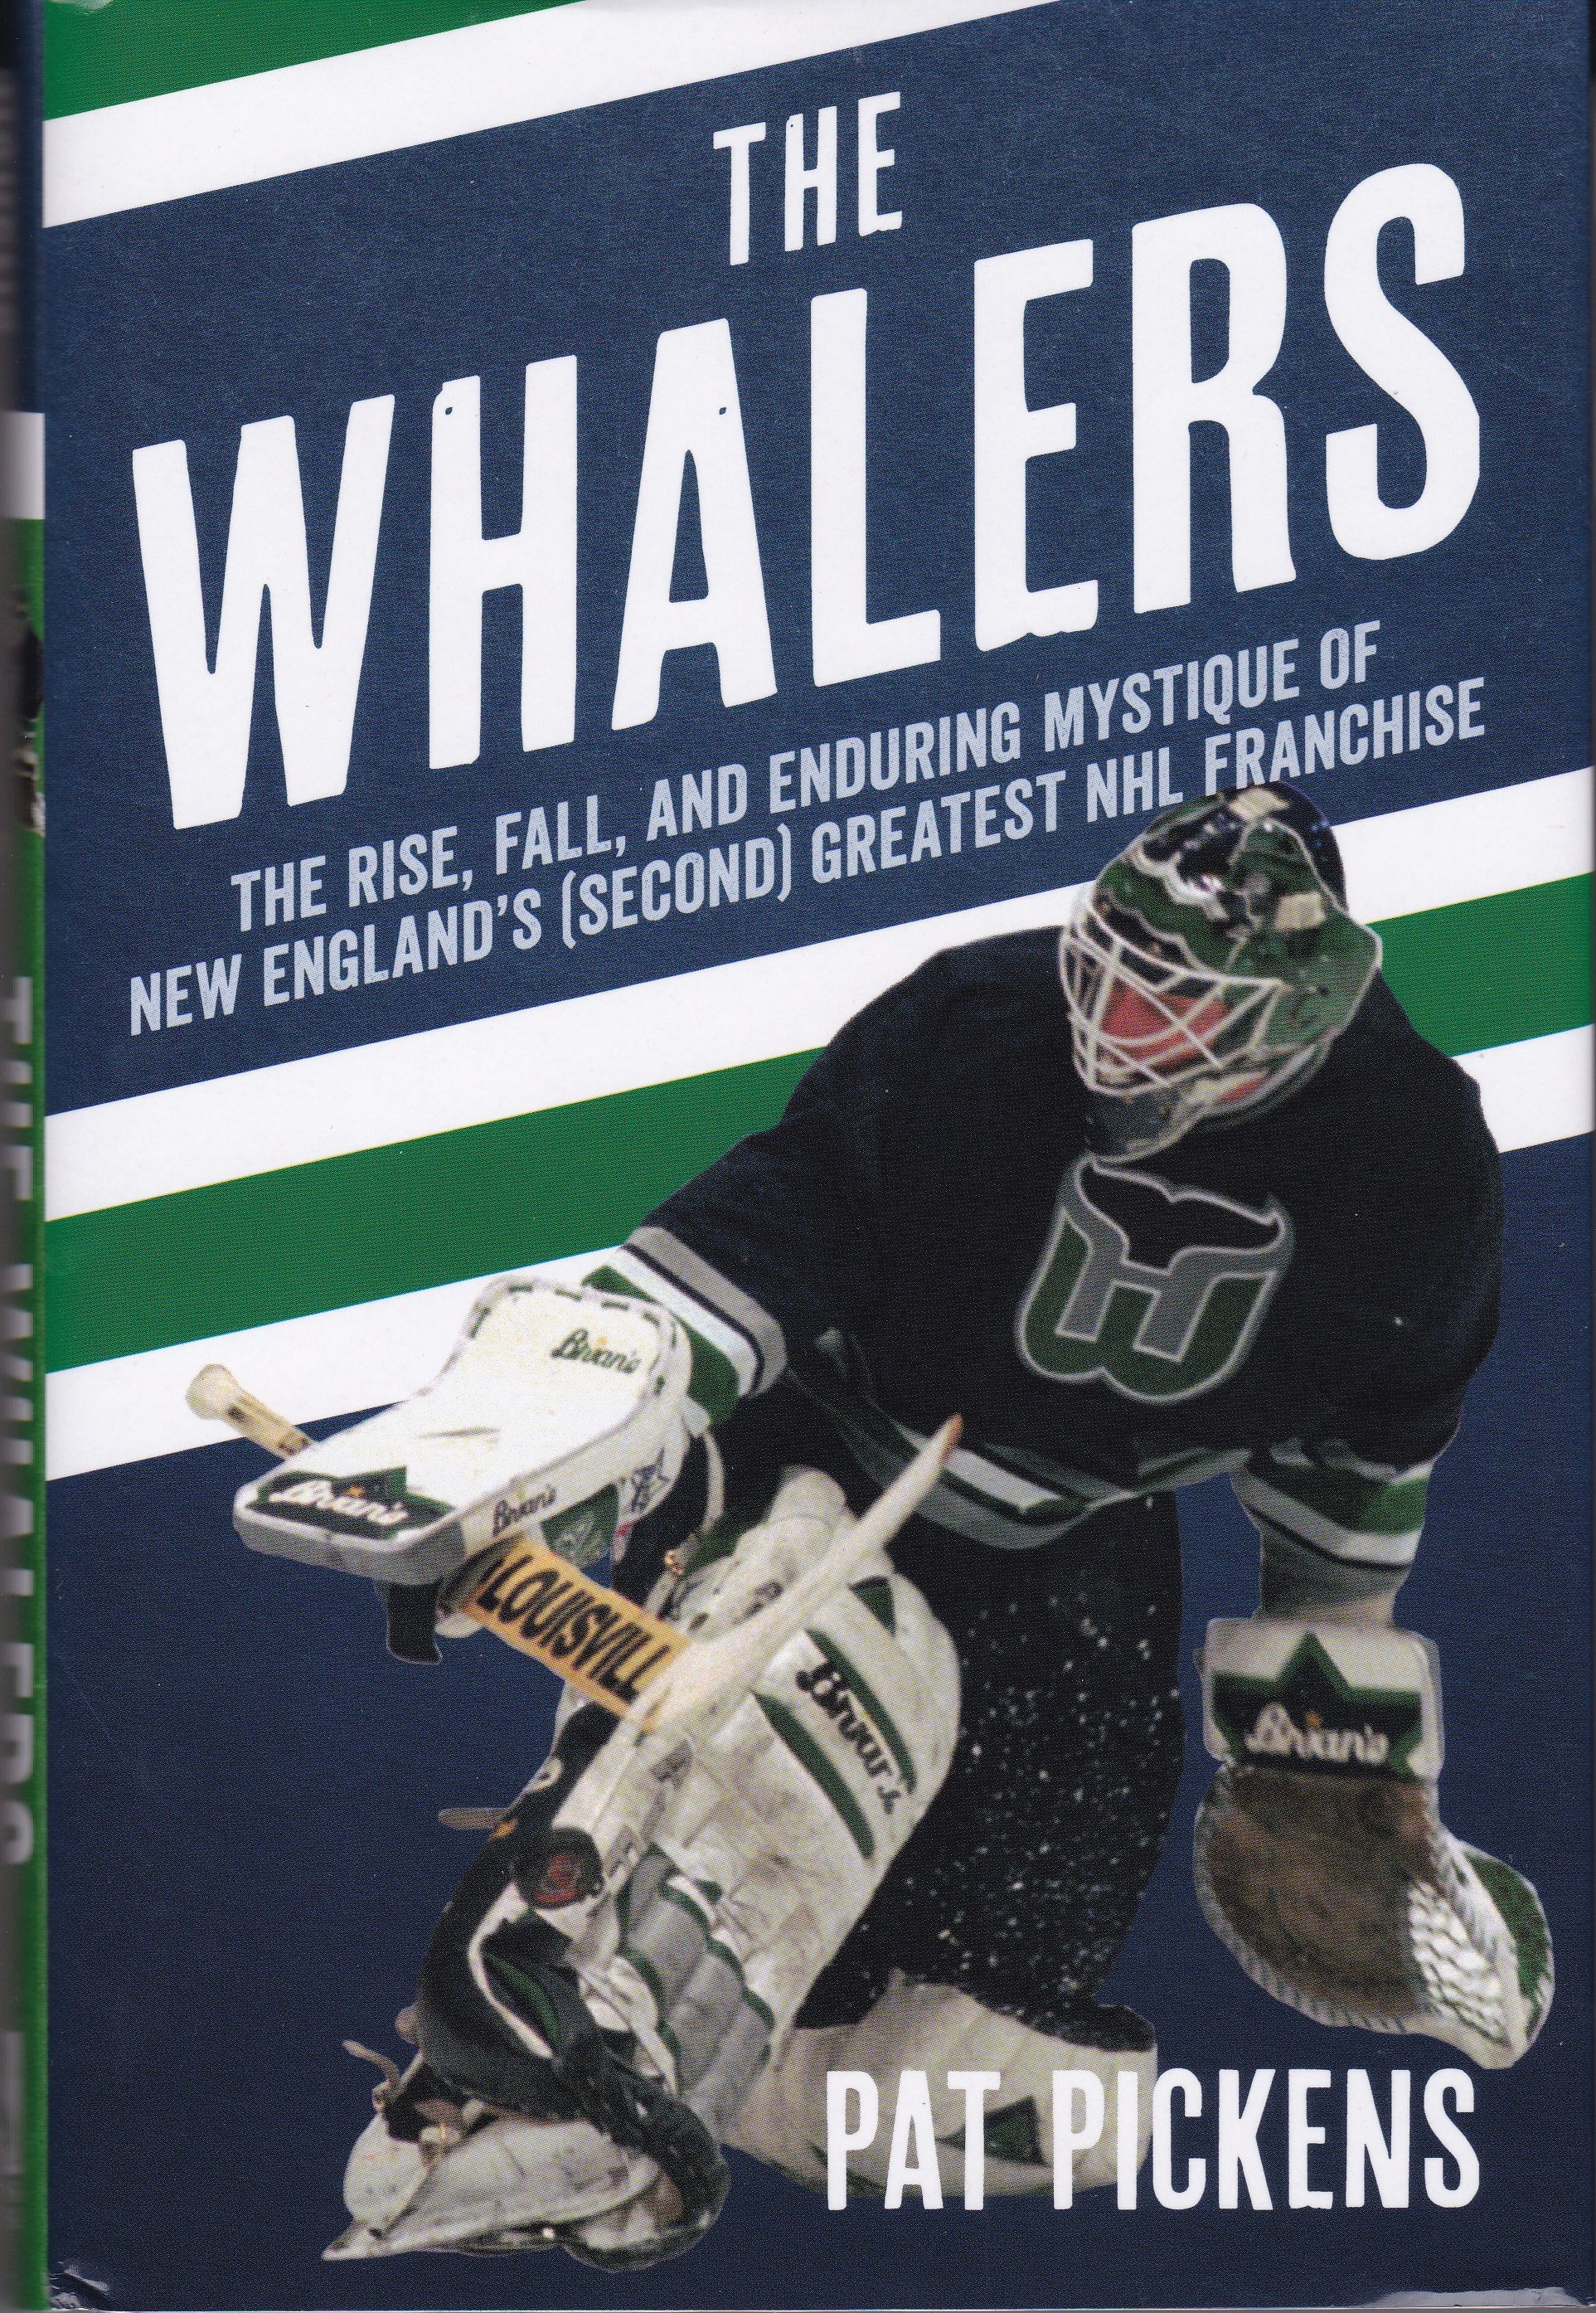 15 Years of Whalers Hockey by Jack Lautier Hartford New England Whalers NHL  WHA